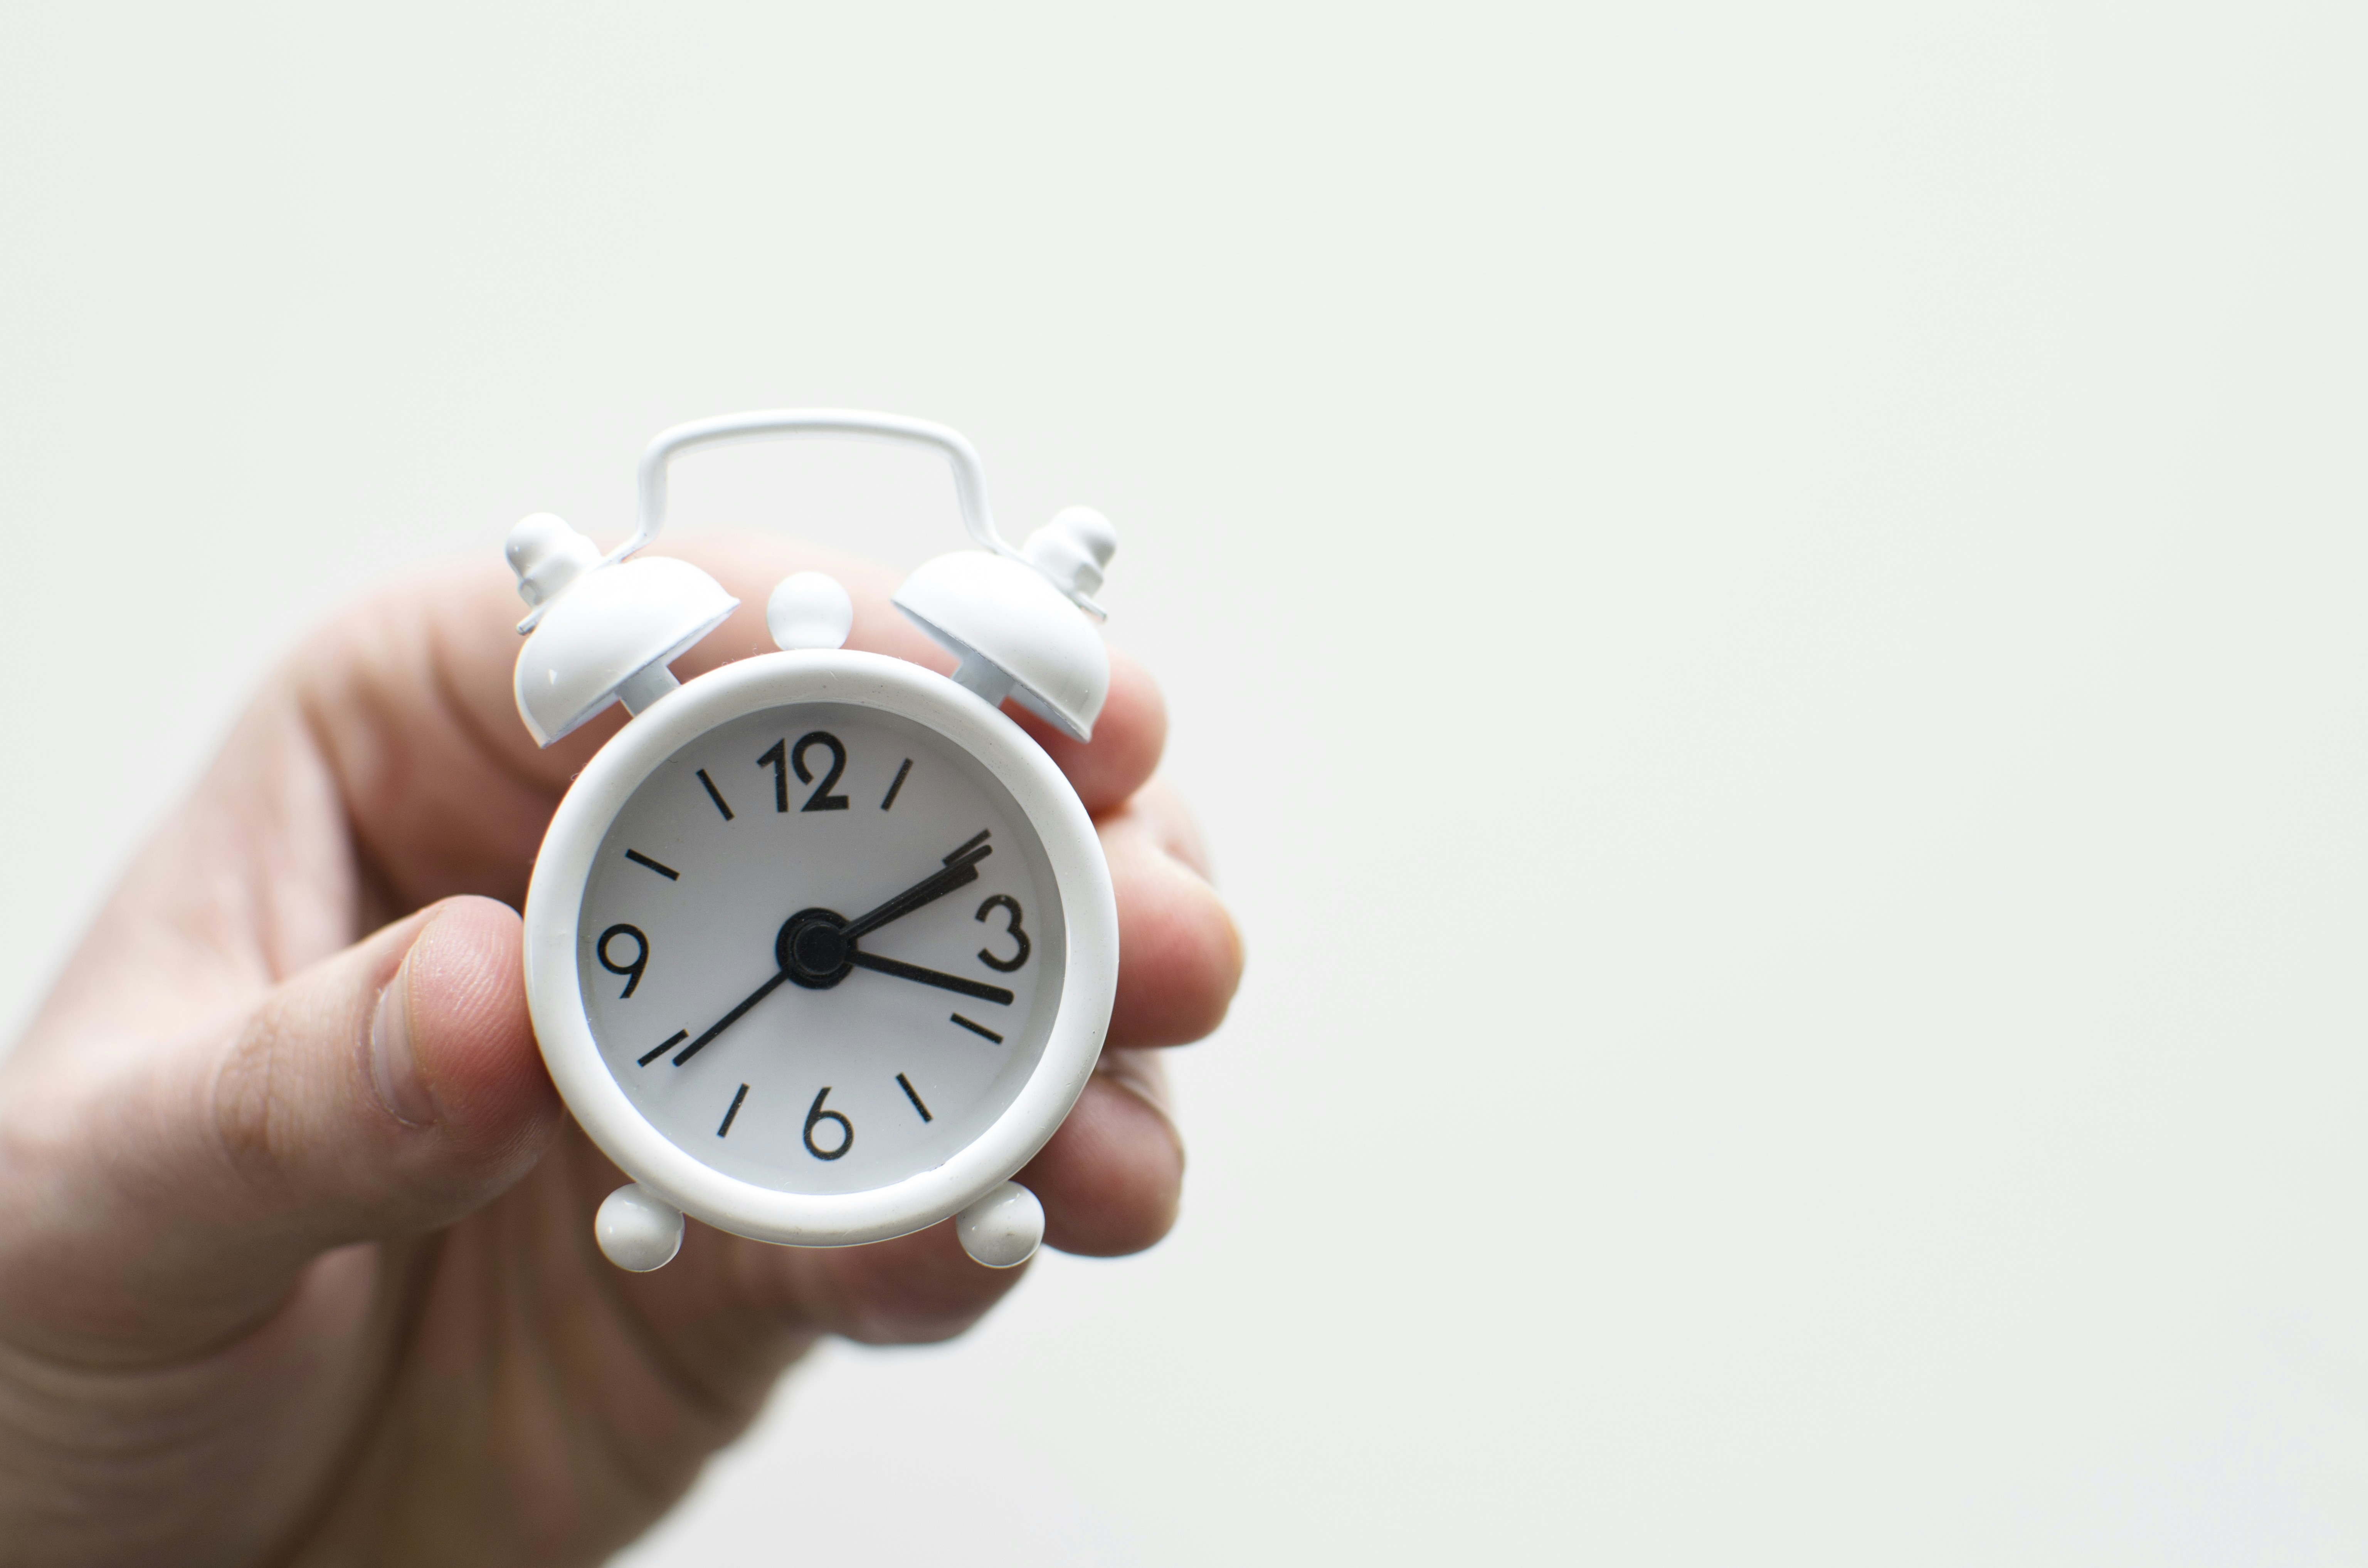 What Are The Most Effective Time Management Tips For Busy People?